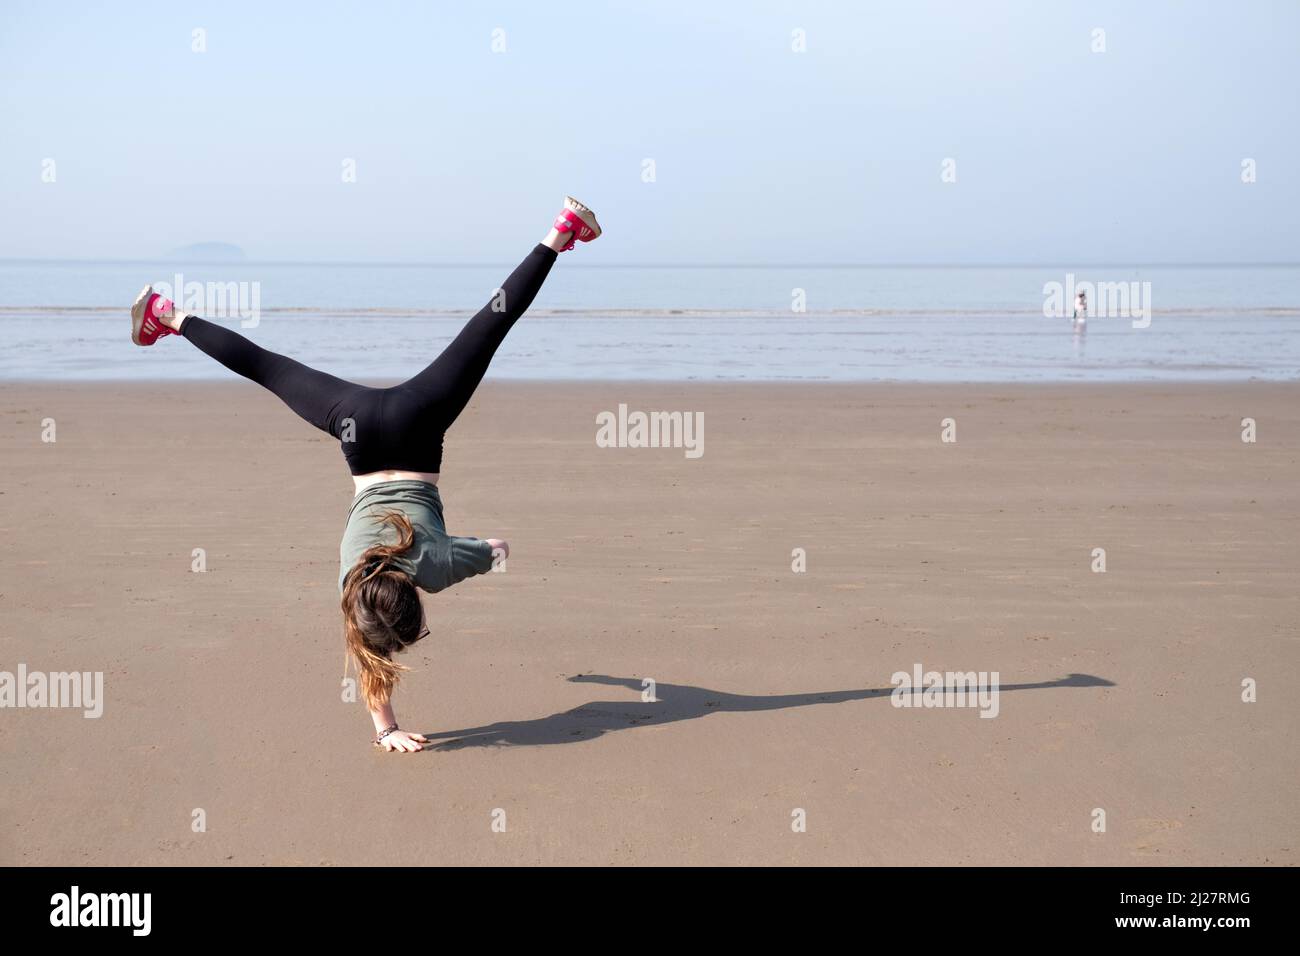 A young girl performs cartwheels on an empty beach. It’s a bright sunny day as the energetic youngster is shown mid move in an upside down position. Stock Photo